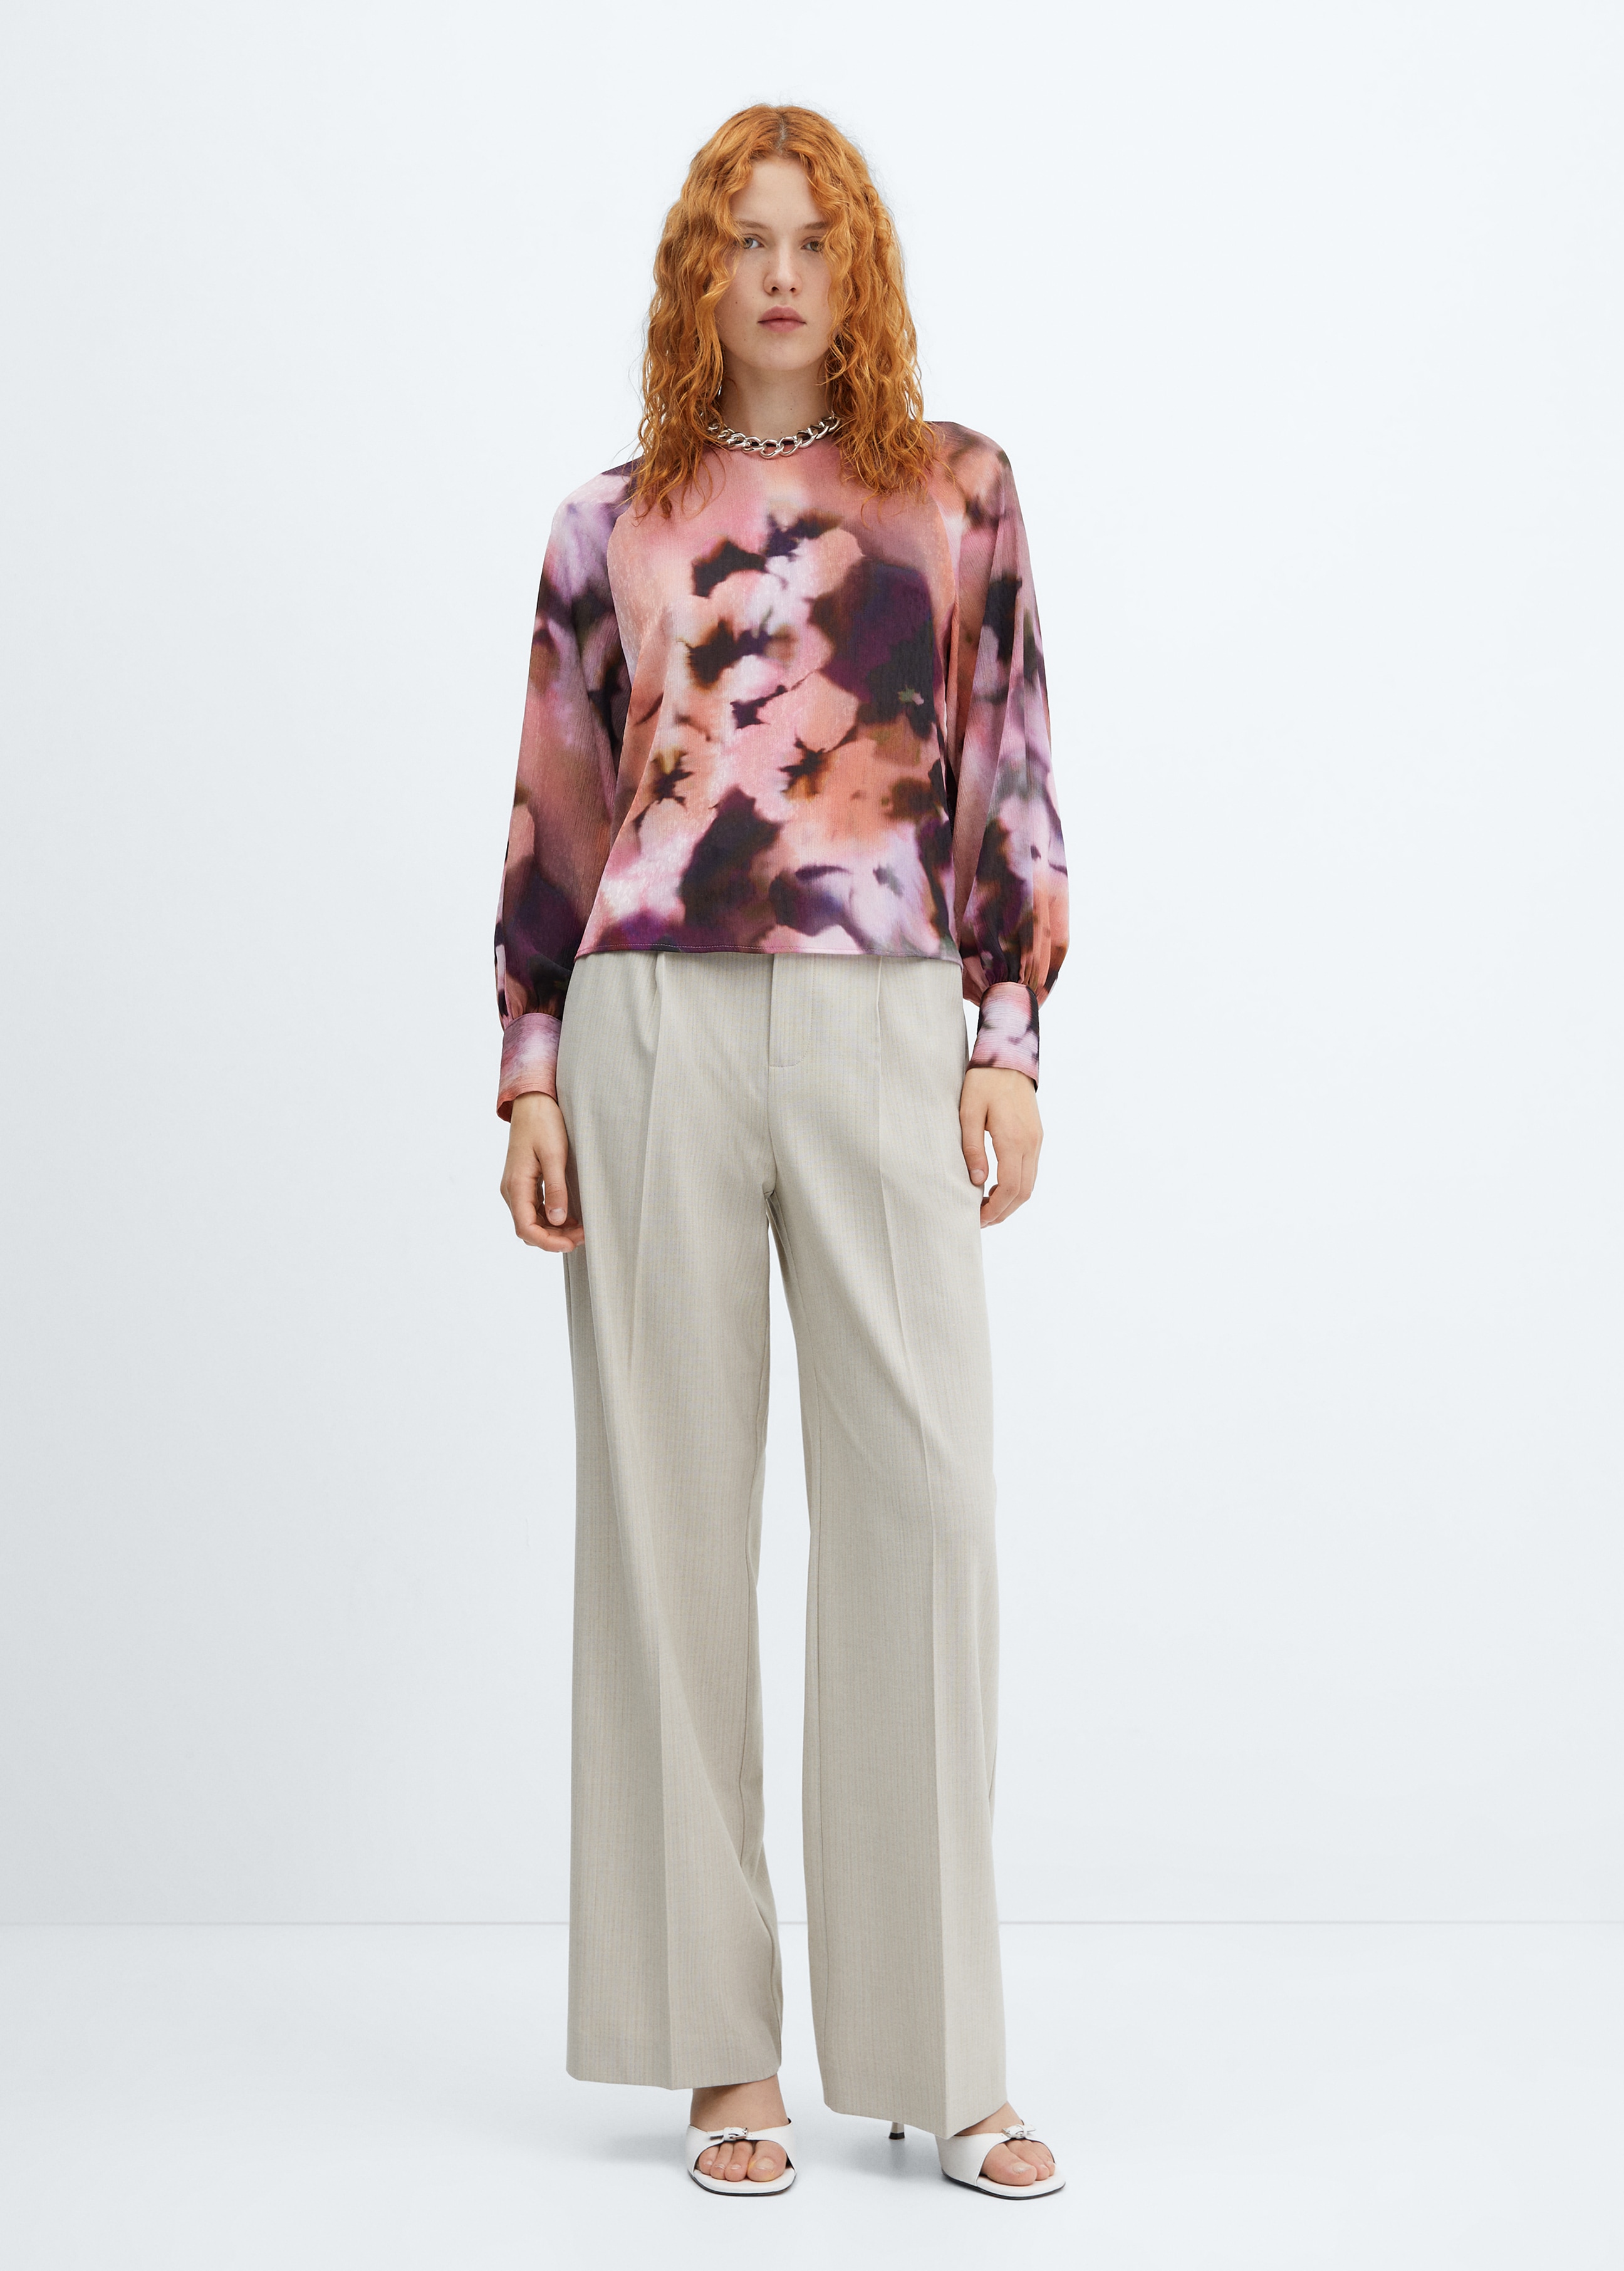 Puffed sleeves floral shirt - General plane